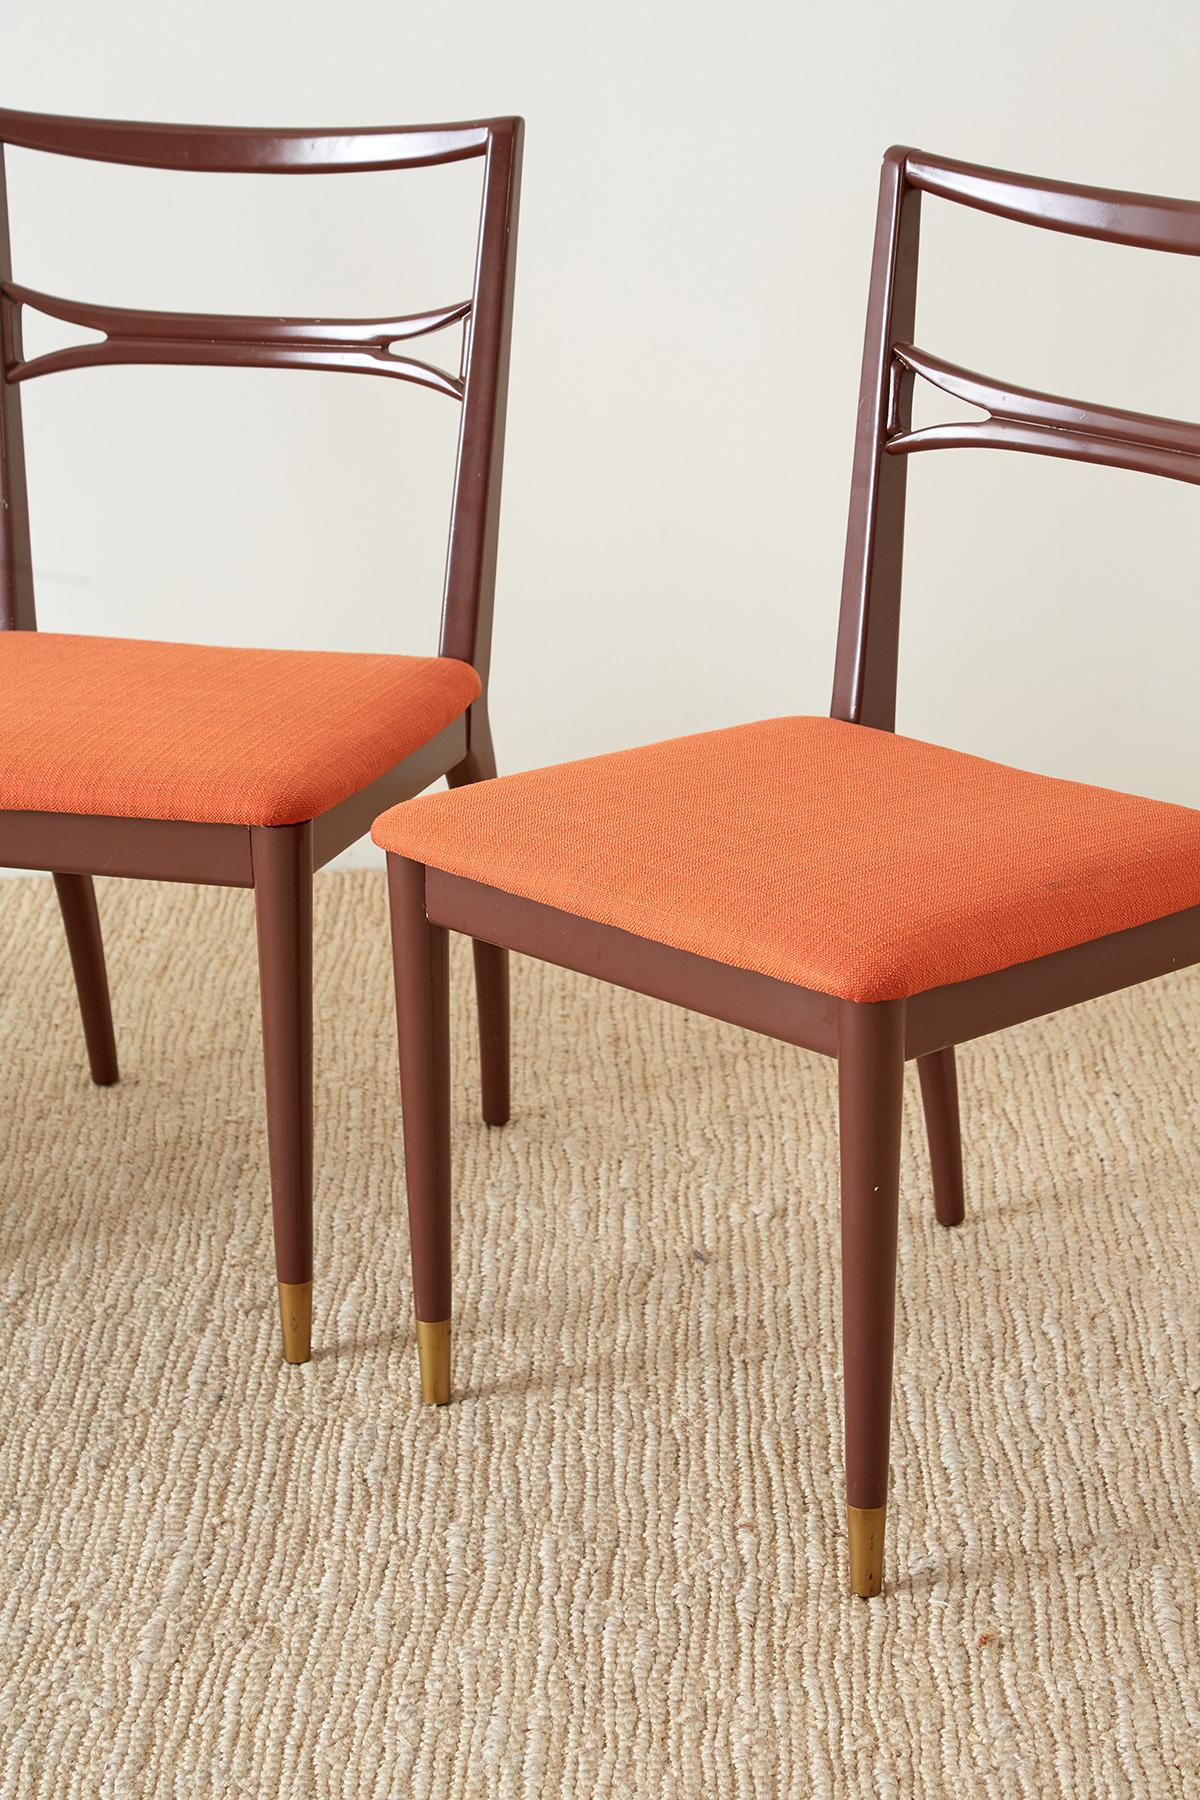 Set of Four Midcentury Lacquered Dining Chairs im Zustand „Gut“ in Rio Vista, CA